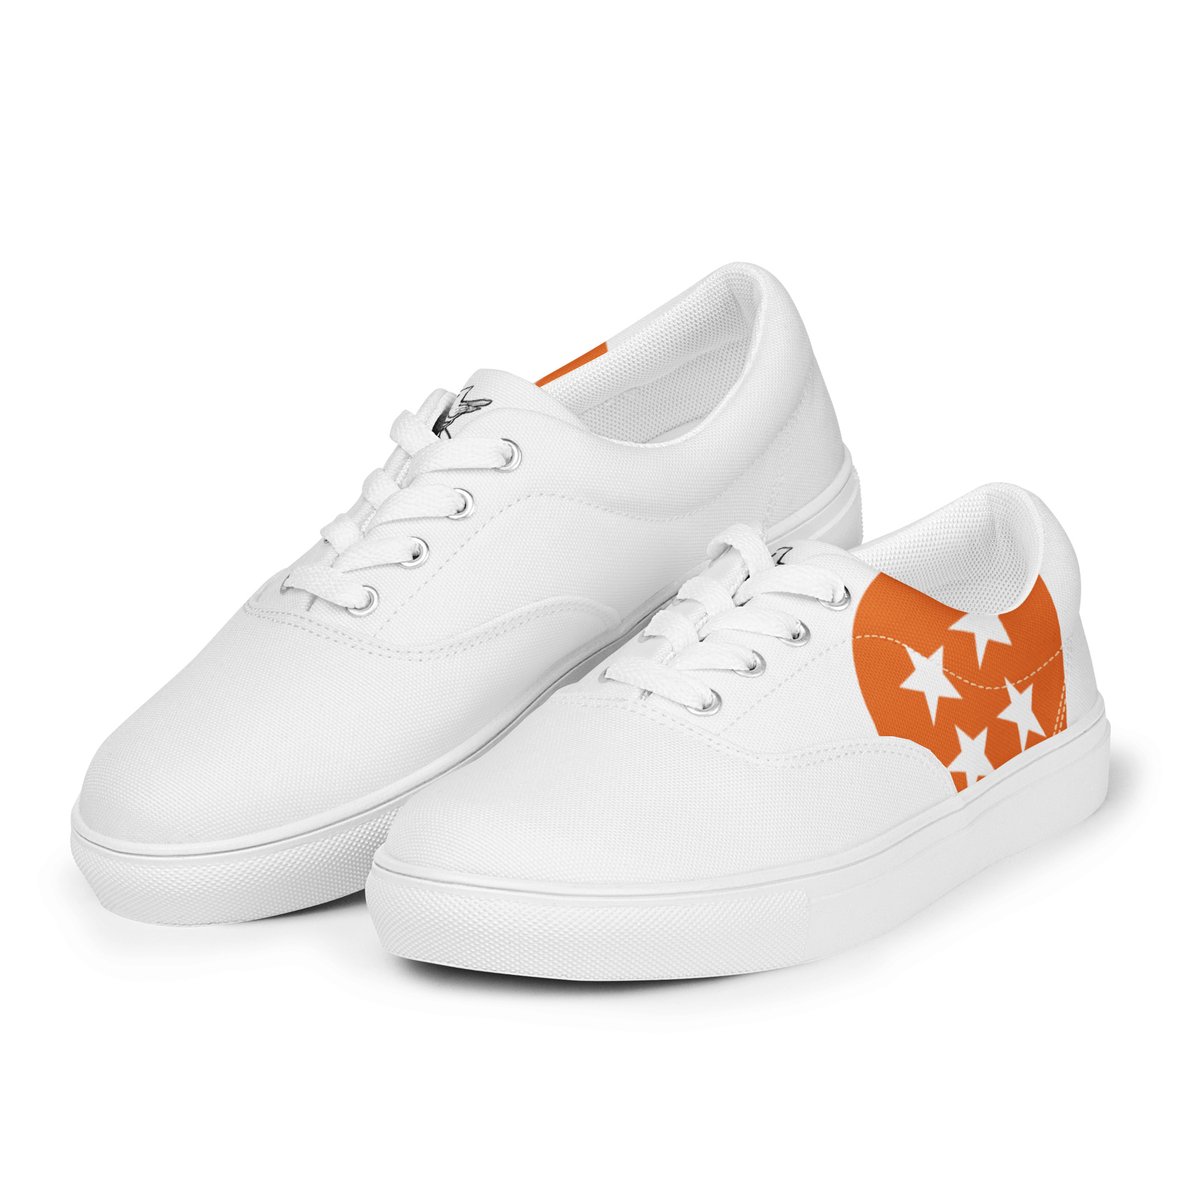 Image of Four Star Lifestyle Shoes White